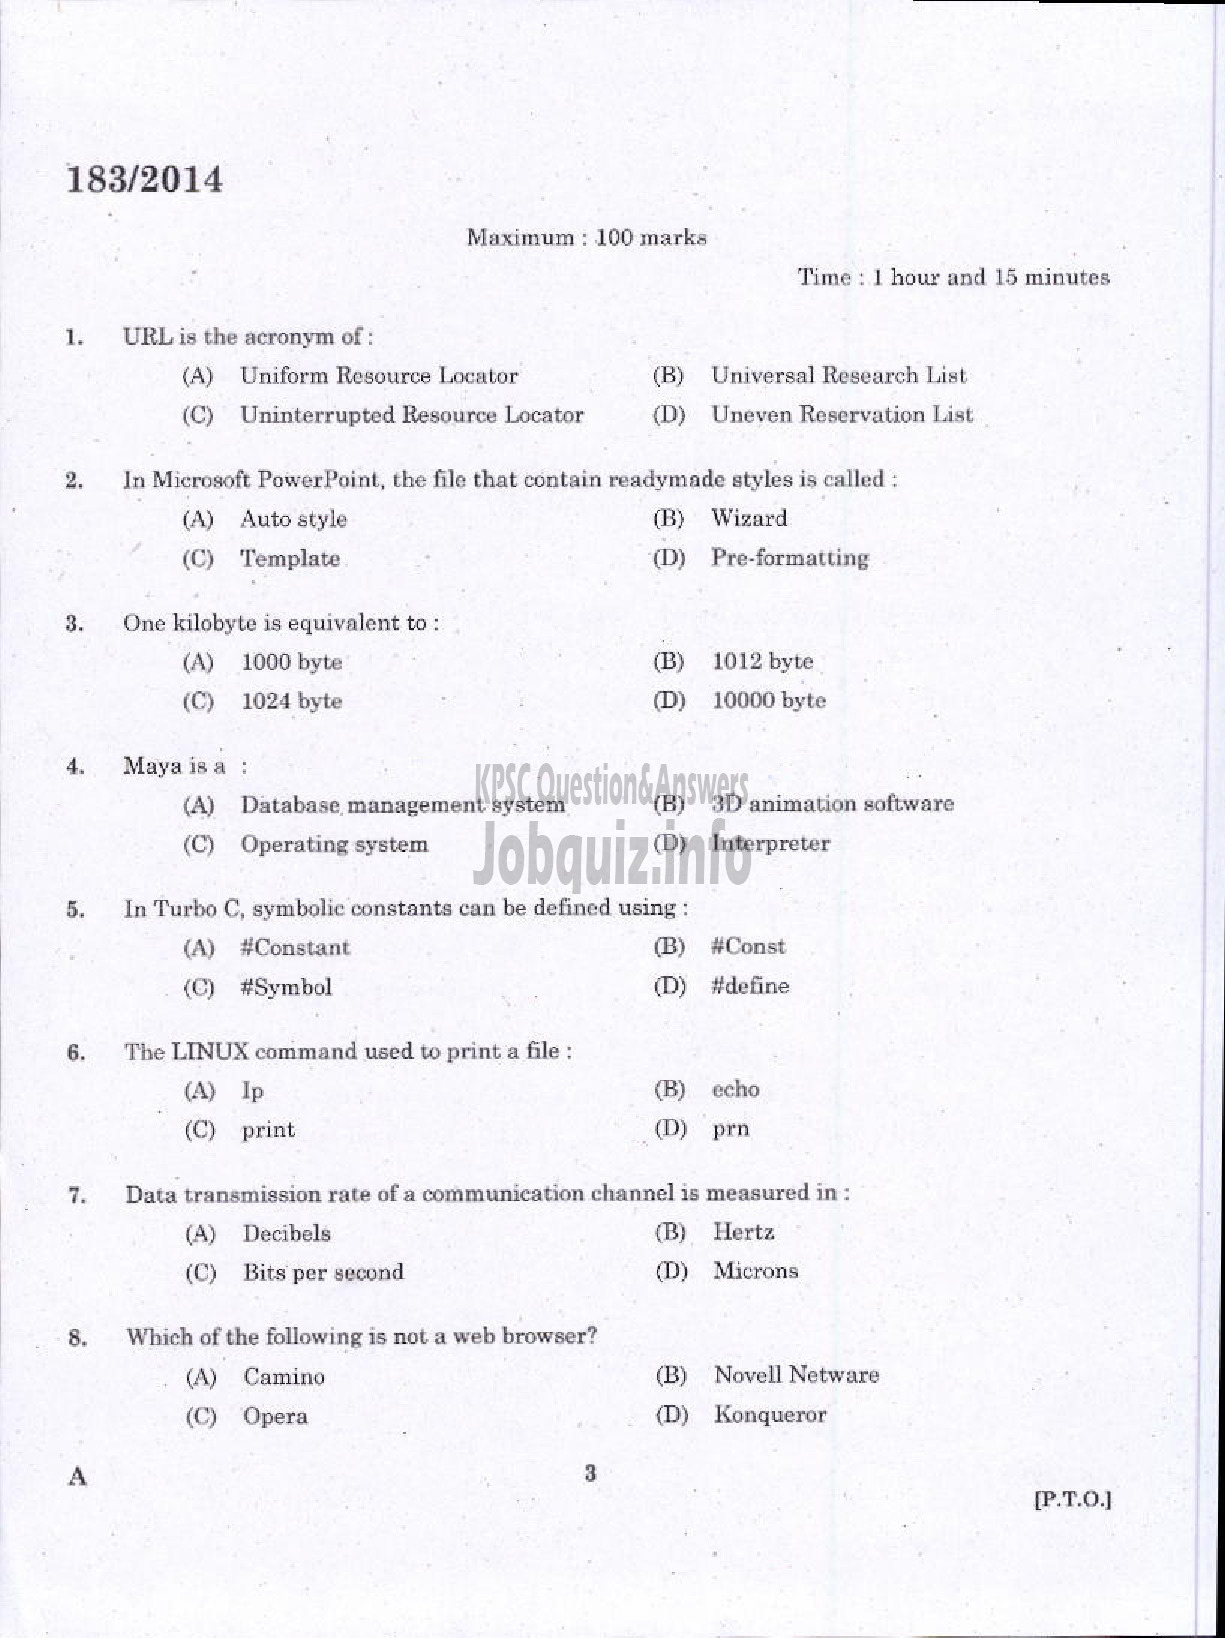 Kerala PSC Question Paper - TRADESMAN COMPUTER ENGINEERING TECHNICAL EDUCATION TVM KGD-1